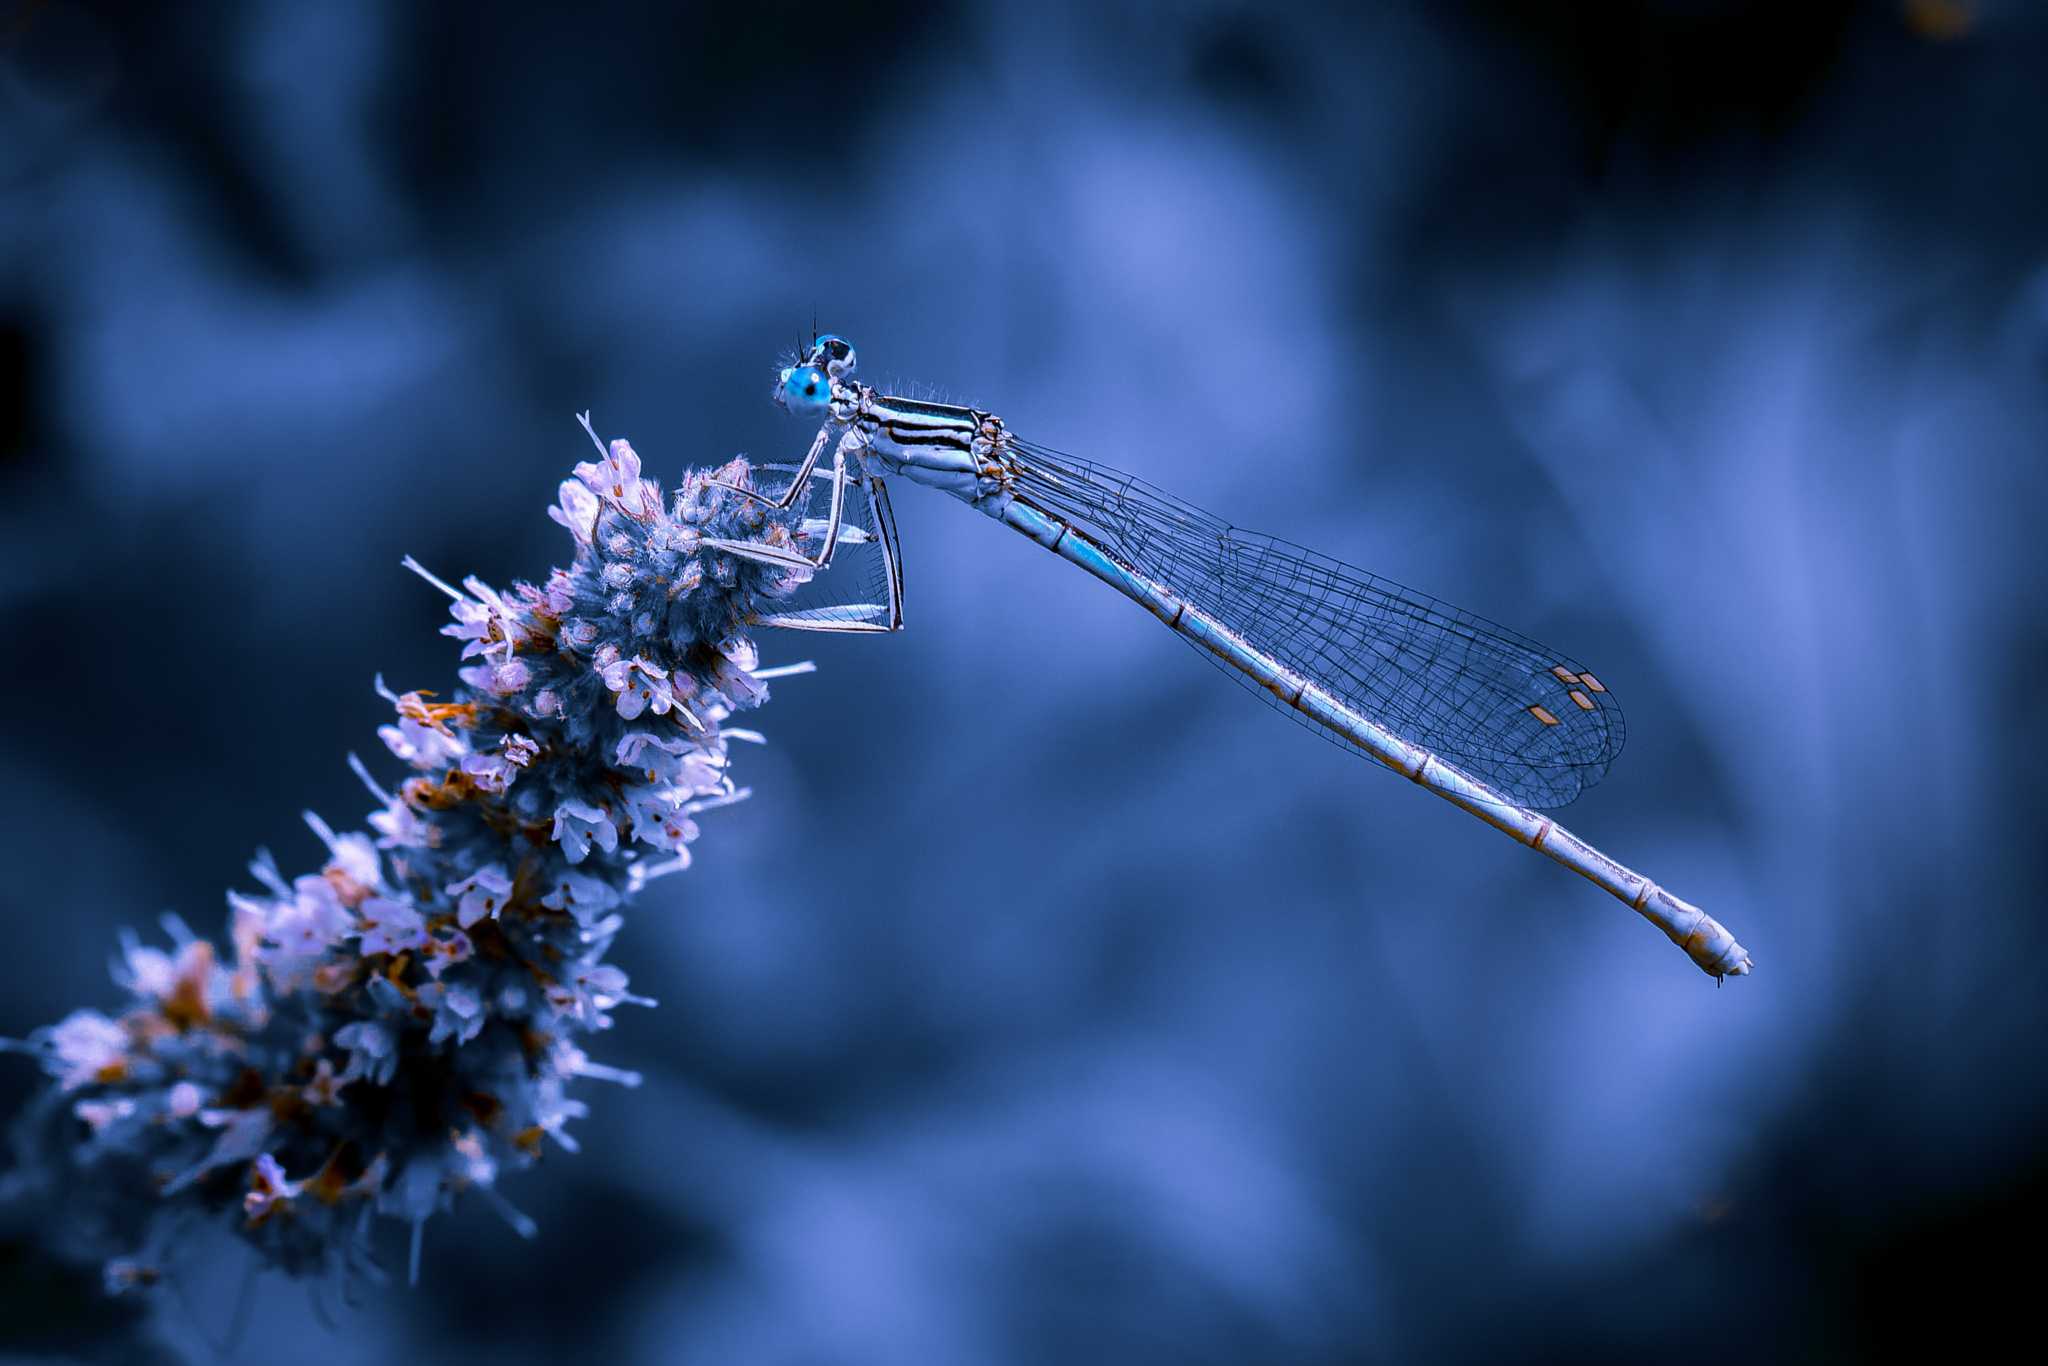 General 2048x1366 nature white flowers dragonflies